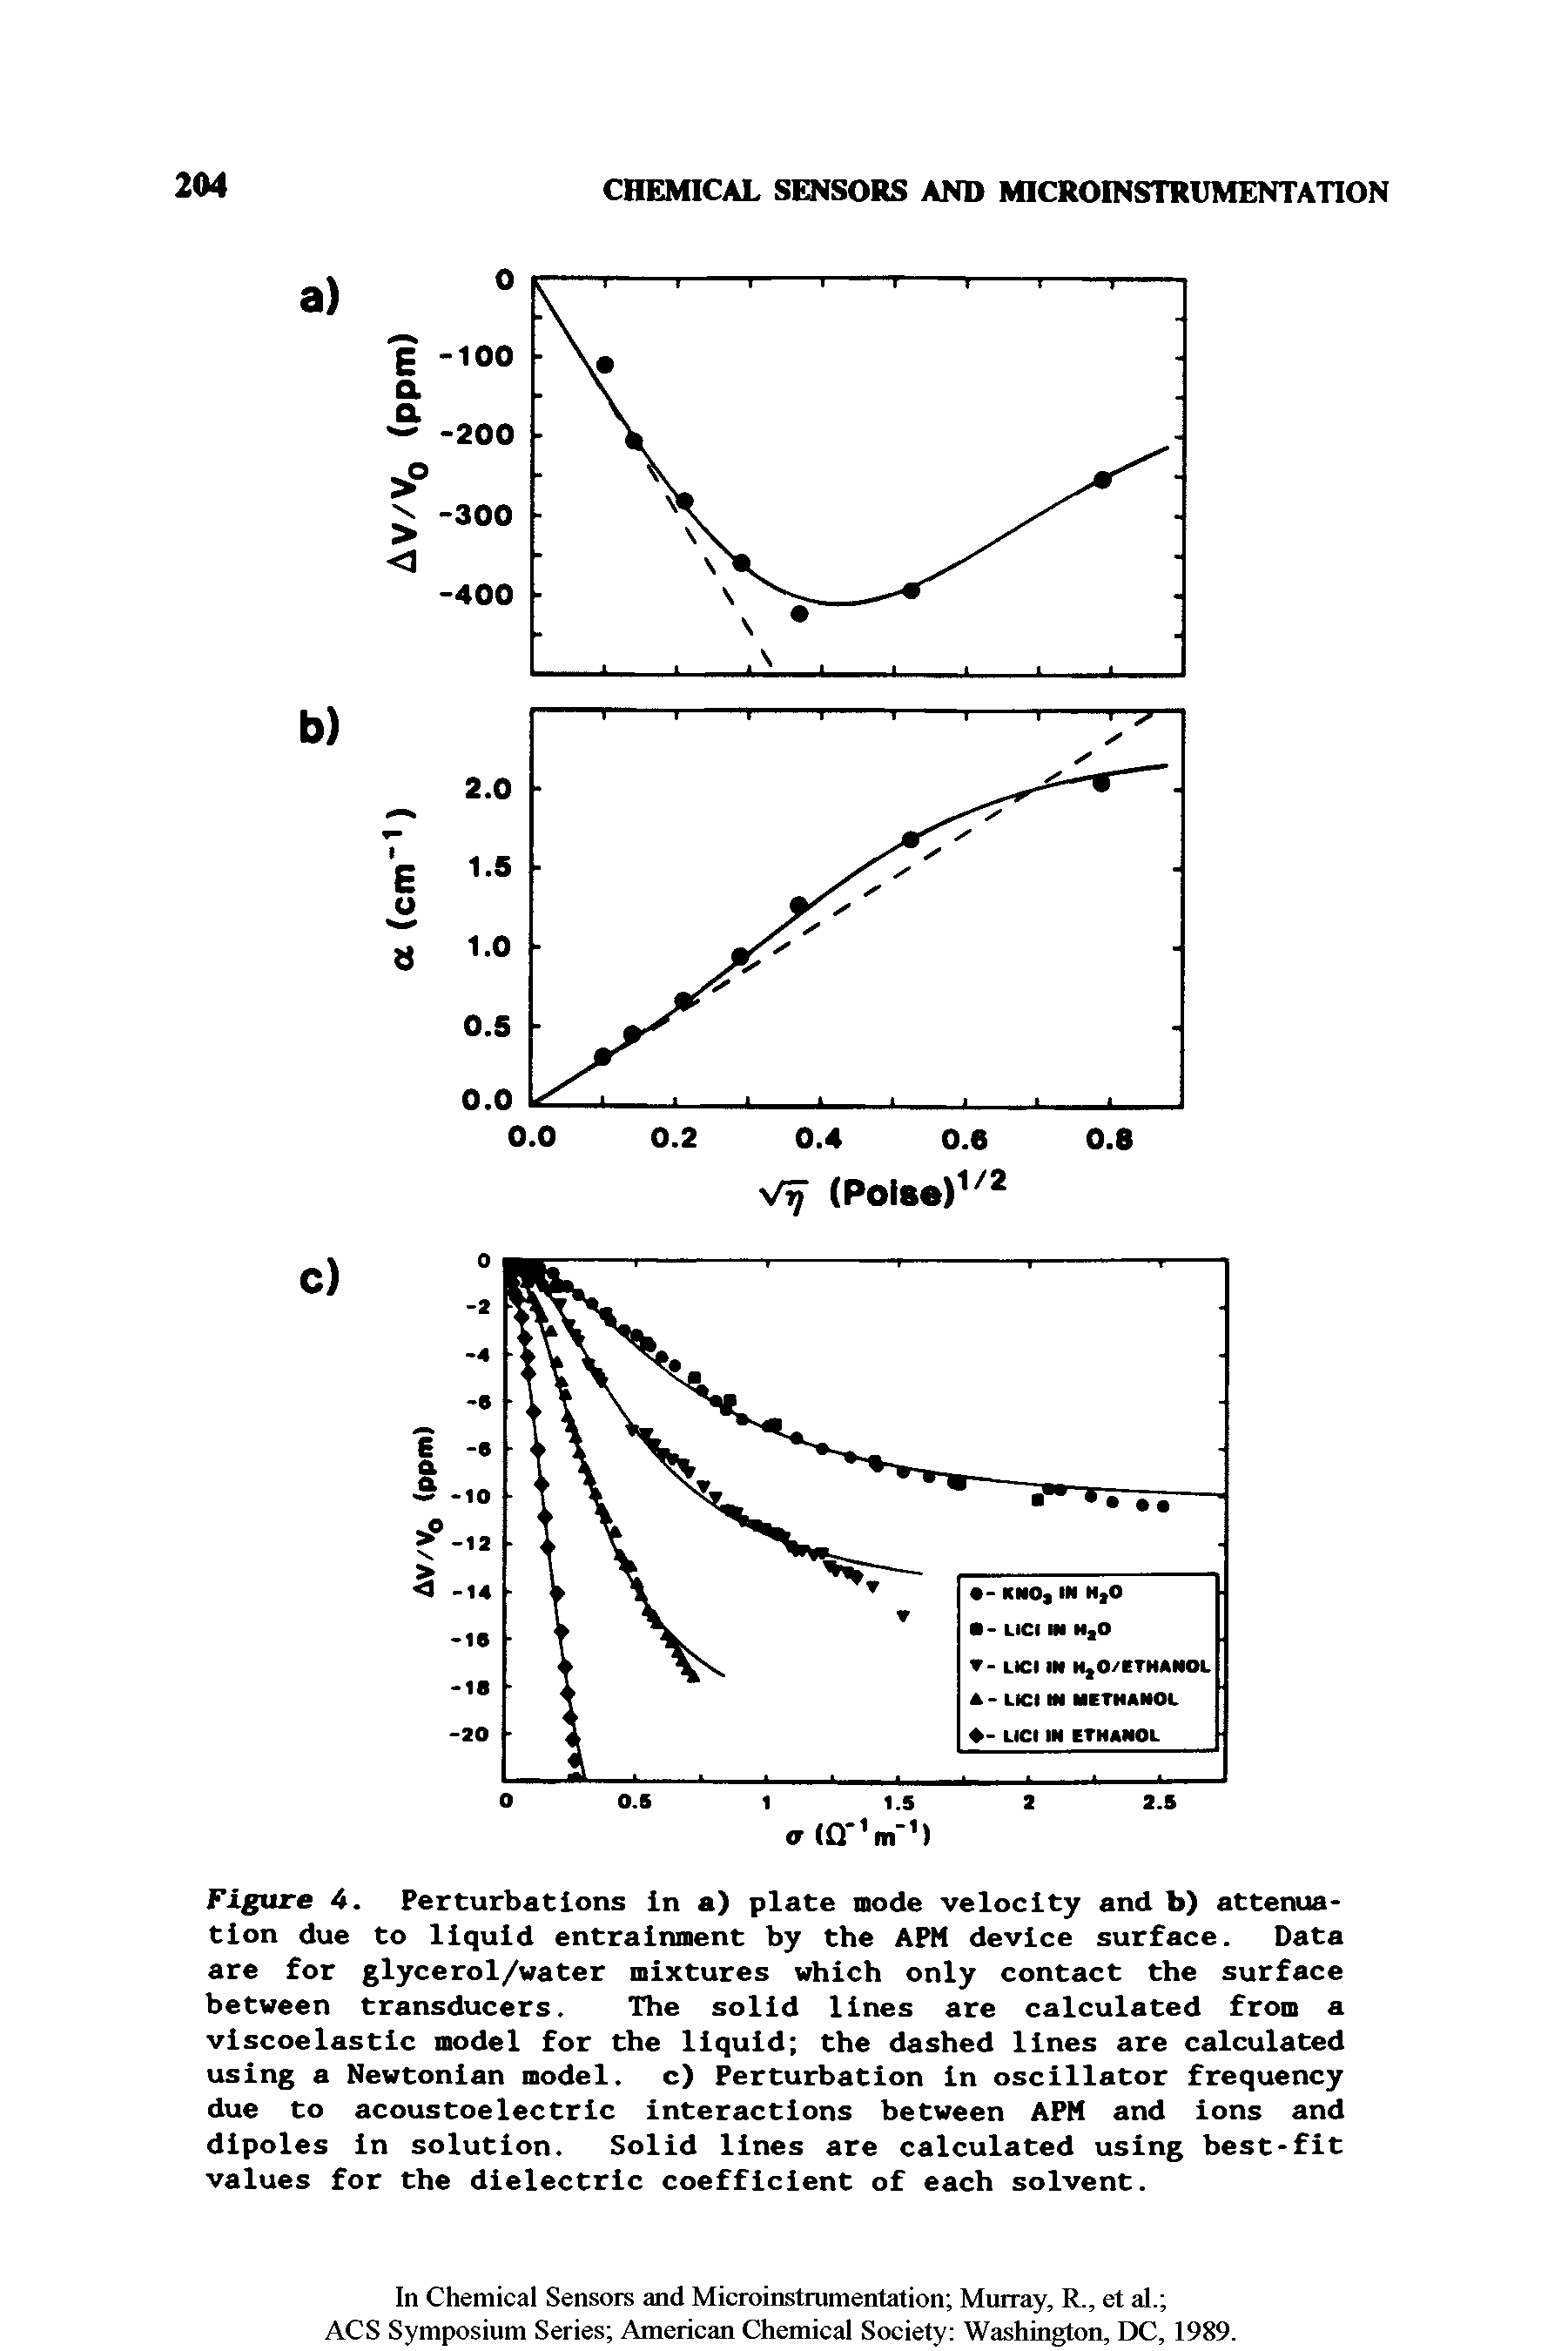 Figure 4. Perturbations in a) plate mode velocity and b) attenuation due to liquid entrainment by the APM device surface. Data are for glycerol/water mixtures which only contact the surface between transducers. The solid lines are calculated from a viscoelastic model for the liquid the dashed lines are calculated using a Newtonian model, c) Perturbation in oscillator frequency due to acoustoelectric interactions between APM and ions and dipoles in solution. Solid lines are calculated using best-fit values for the dielectric coefficient of each solvent.